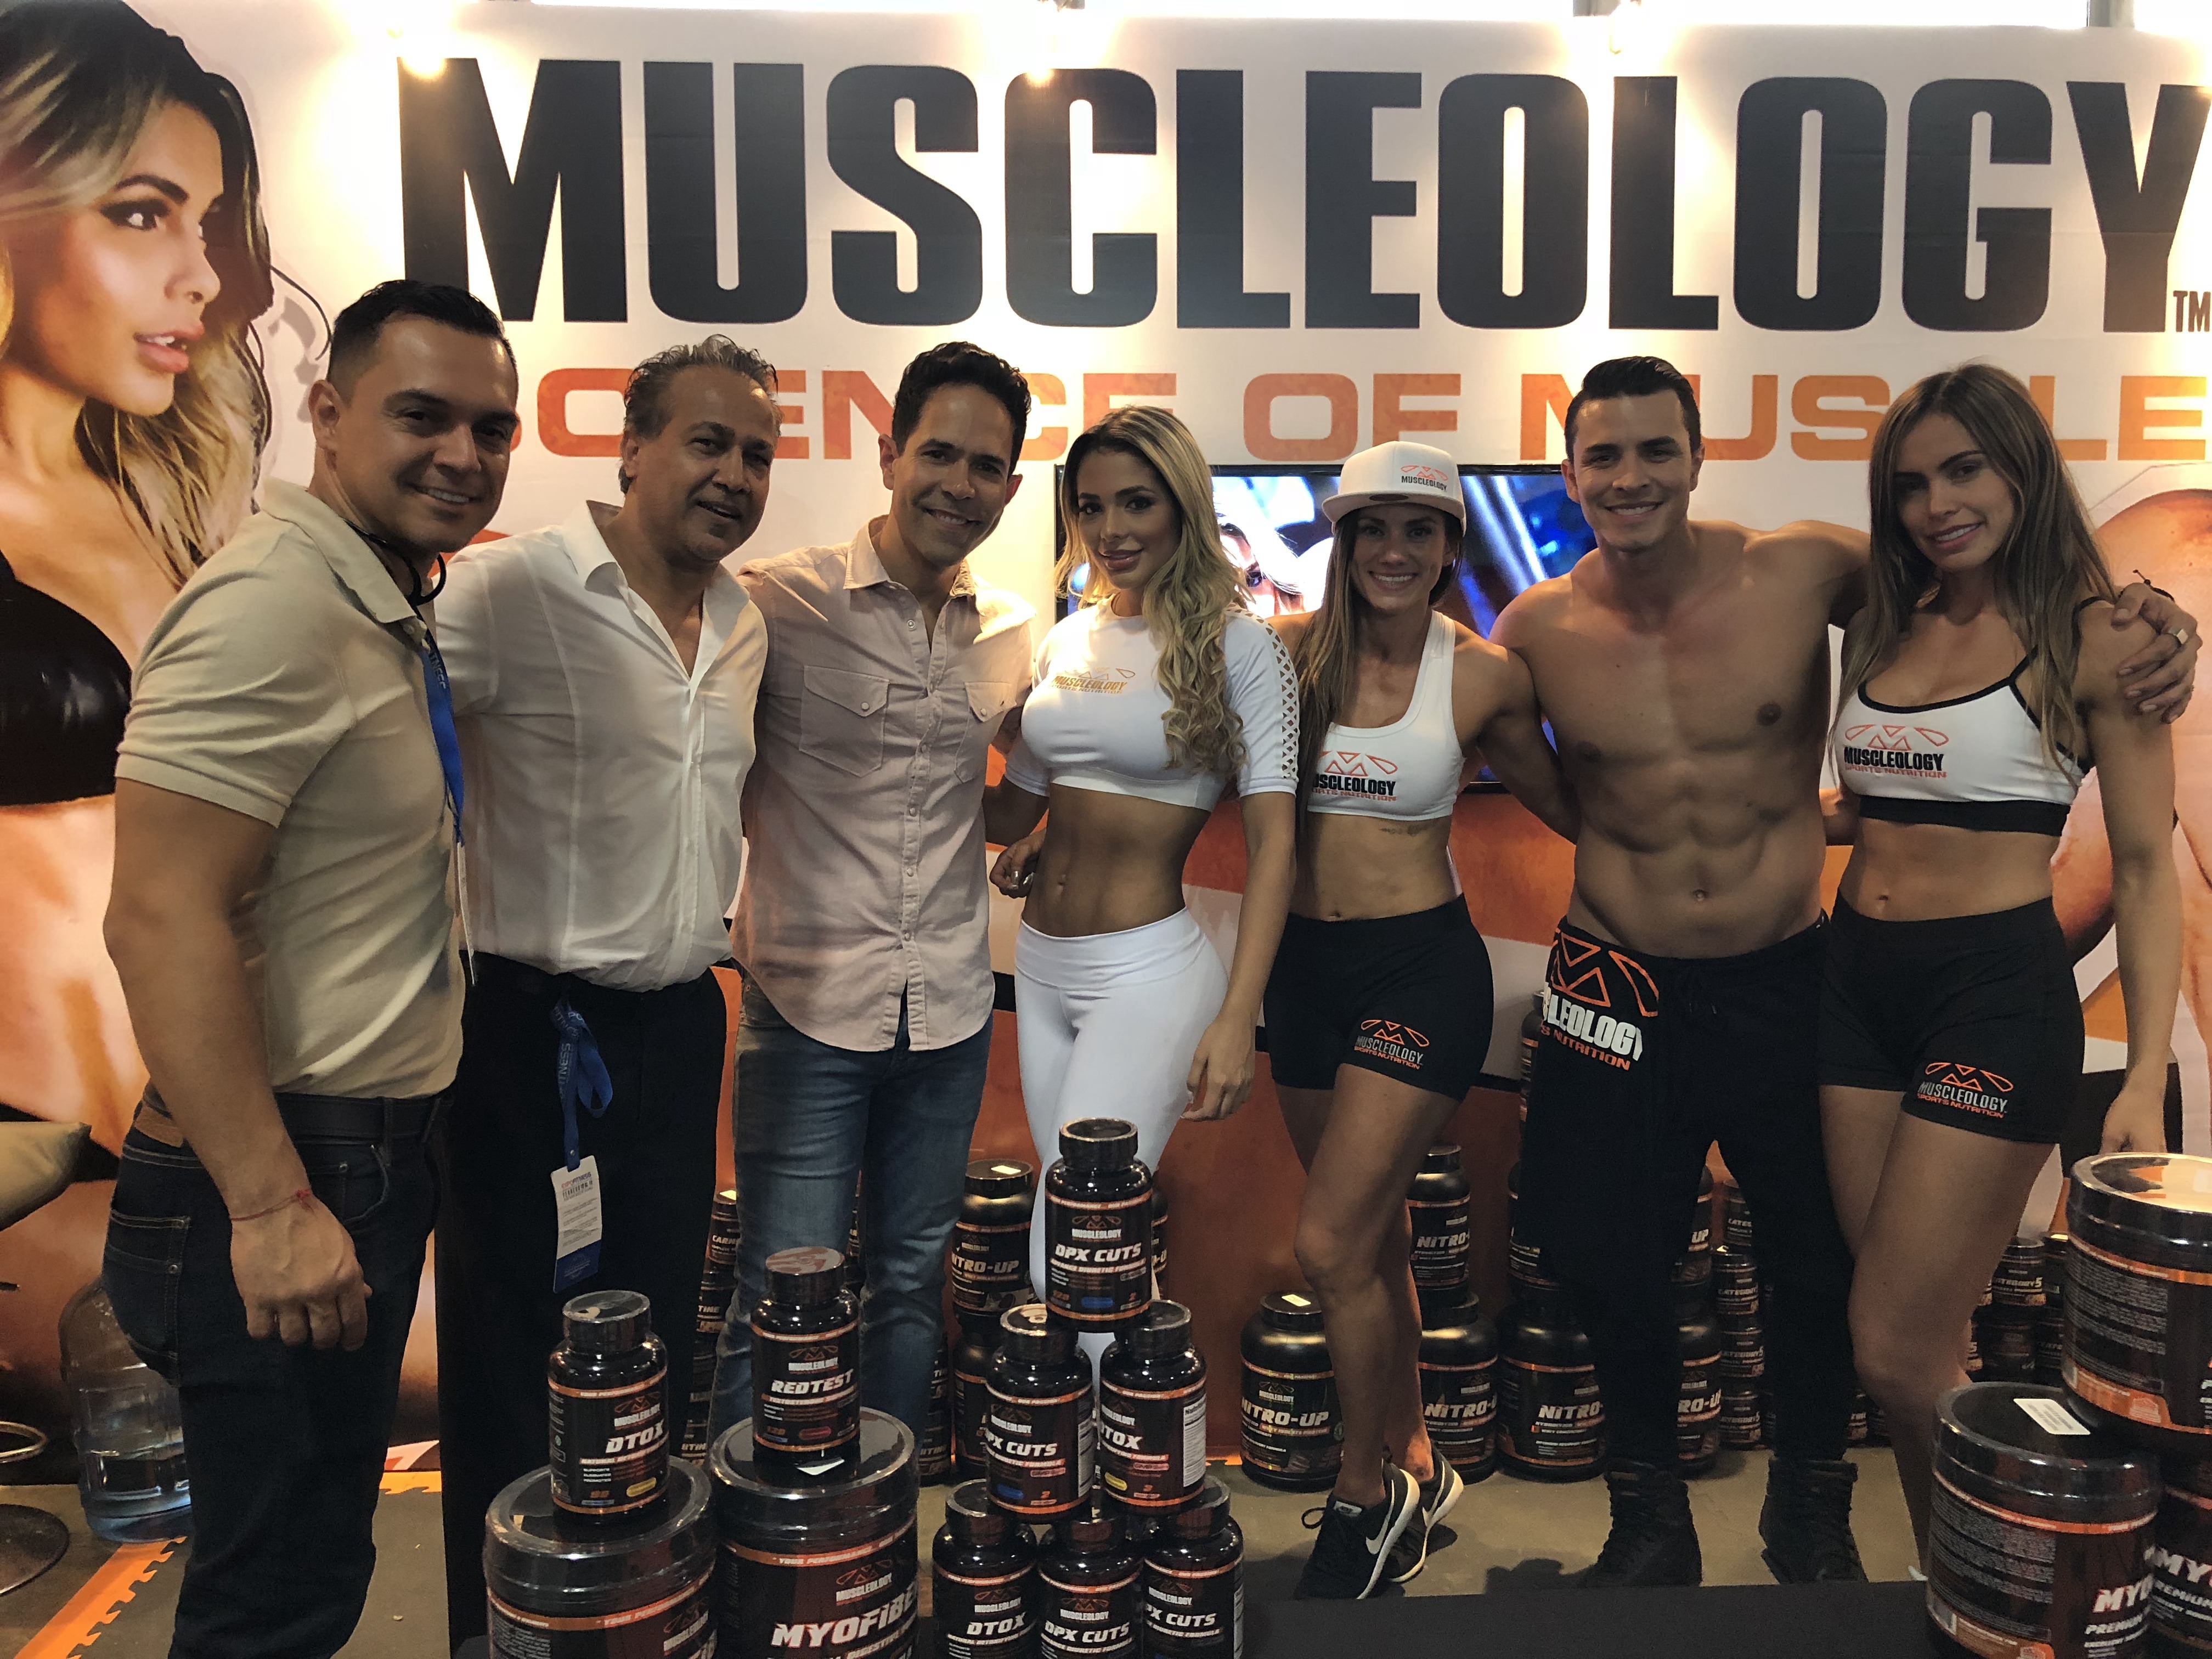 Team Muscleology takes on Colombia at the Expo Fitness 2018